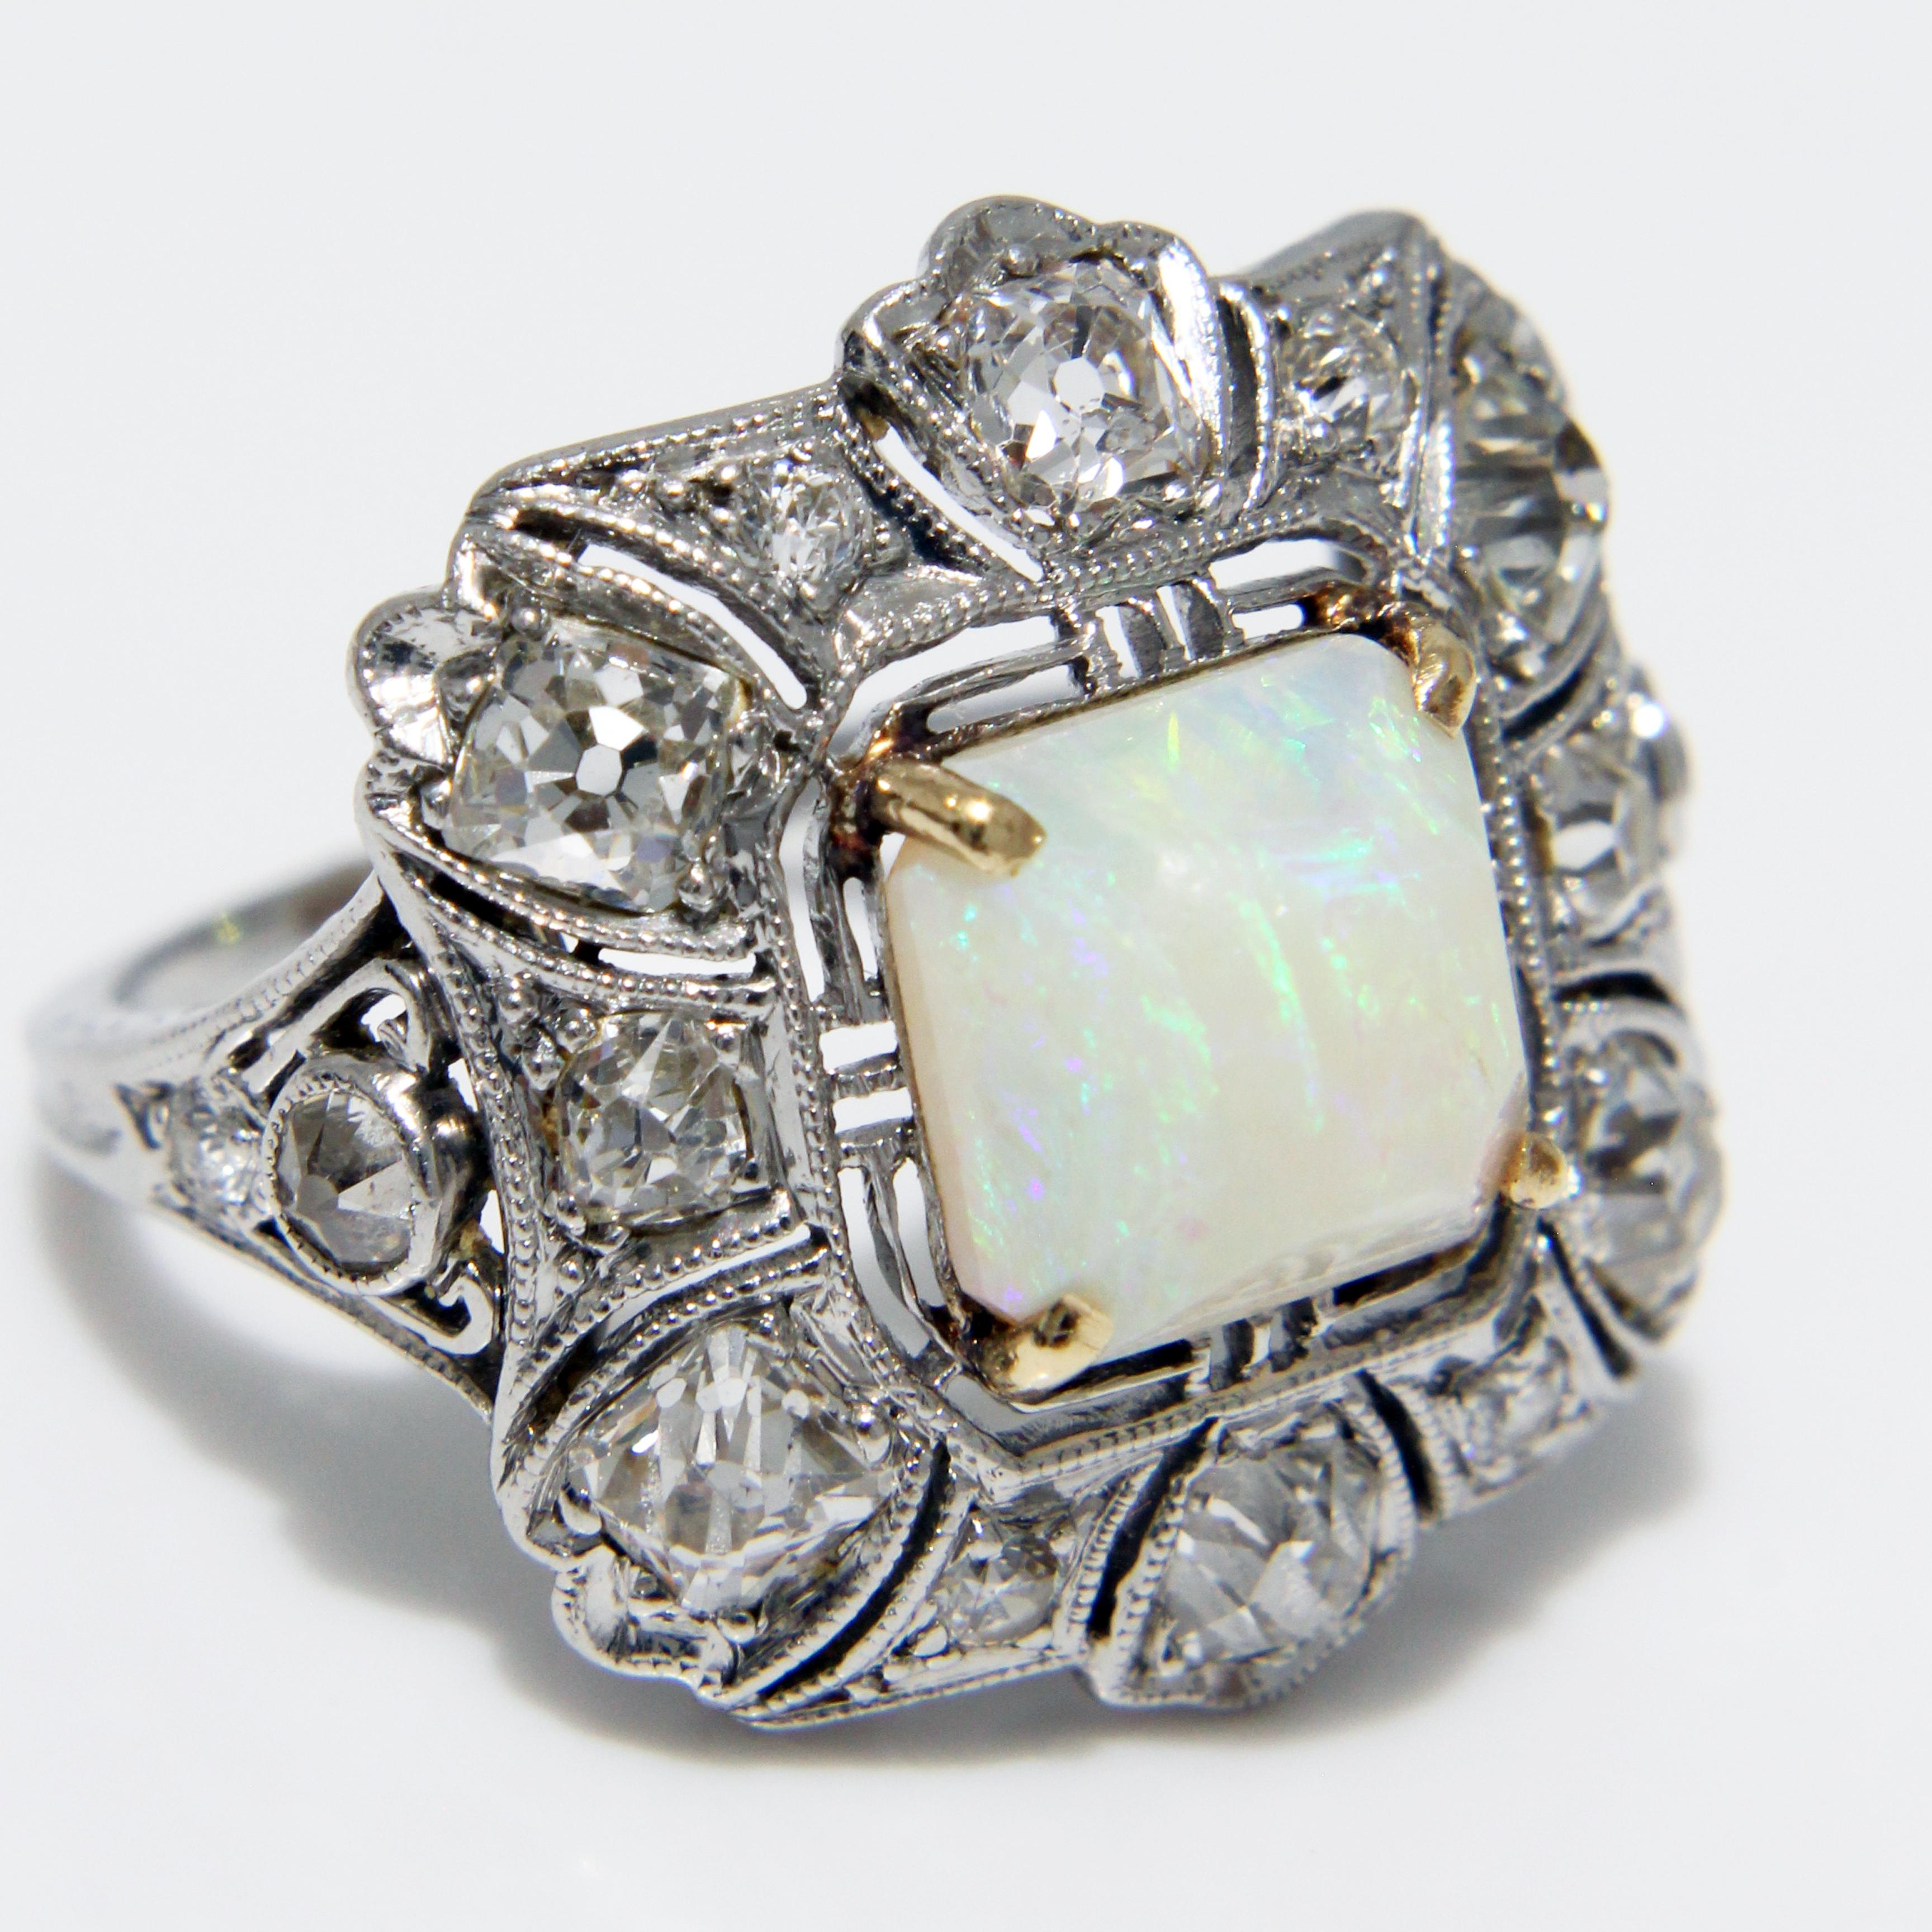 Preowned vintage/antique Art Deco style opal and diamond cocktail ring, likely made in the early 20th C.  Made from a platinum setting, it features one large square opal surrounded by 16 round diamonds.  A stunning and unique fine jewelry piece